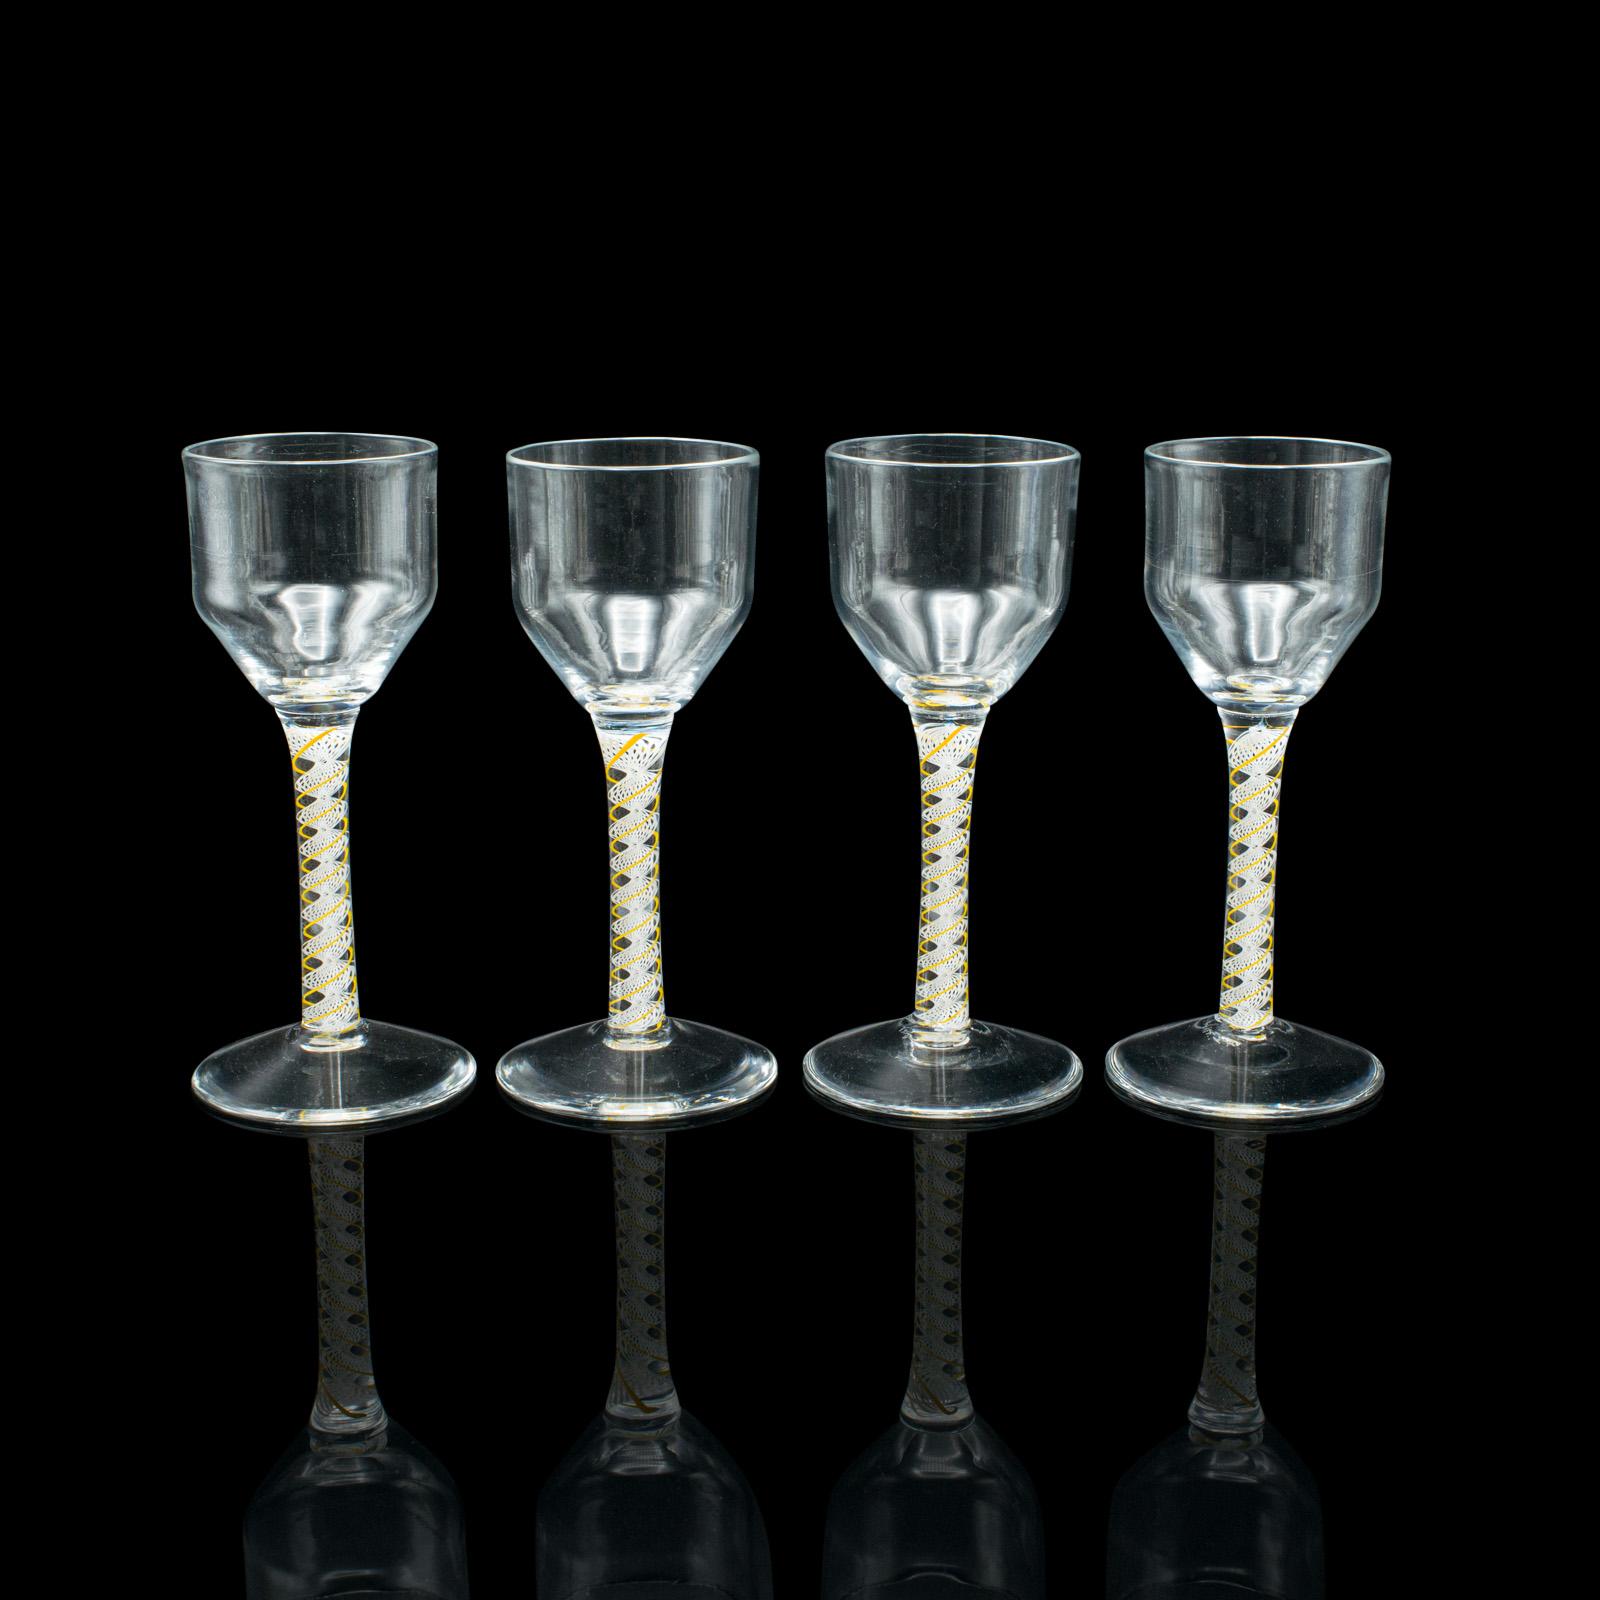 This is a set of 8 vintage aperitif glasses. An English, twist stem spirit or wine glass, dating to the late 20th century.

Pour an aperitif in these delightful glasses, ideal as a complement to an amuse bouche
Displaying a desirable aged patina,